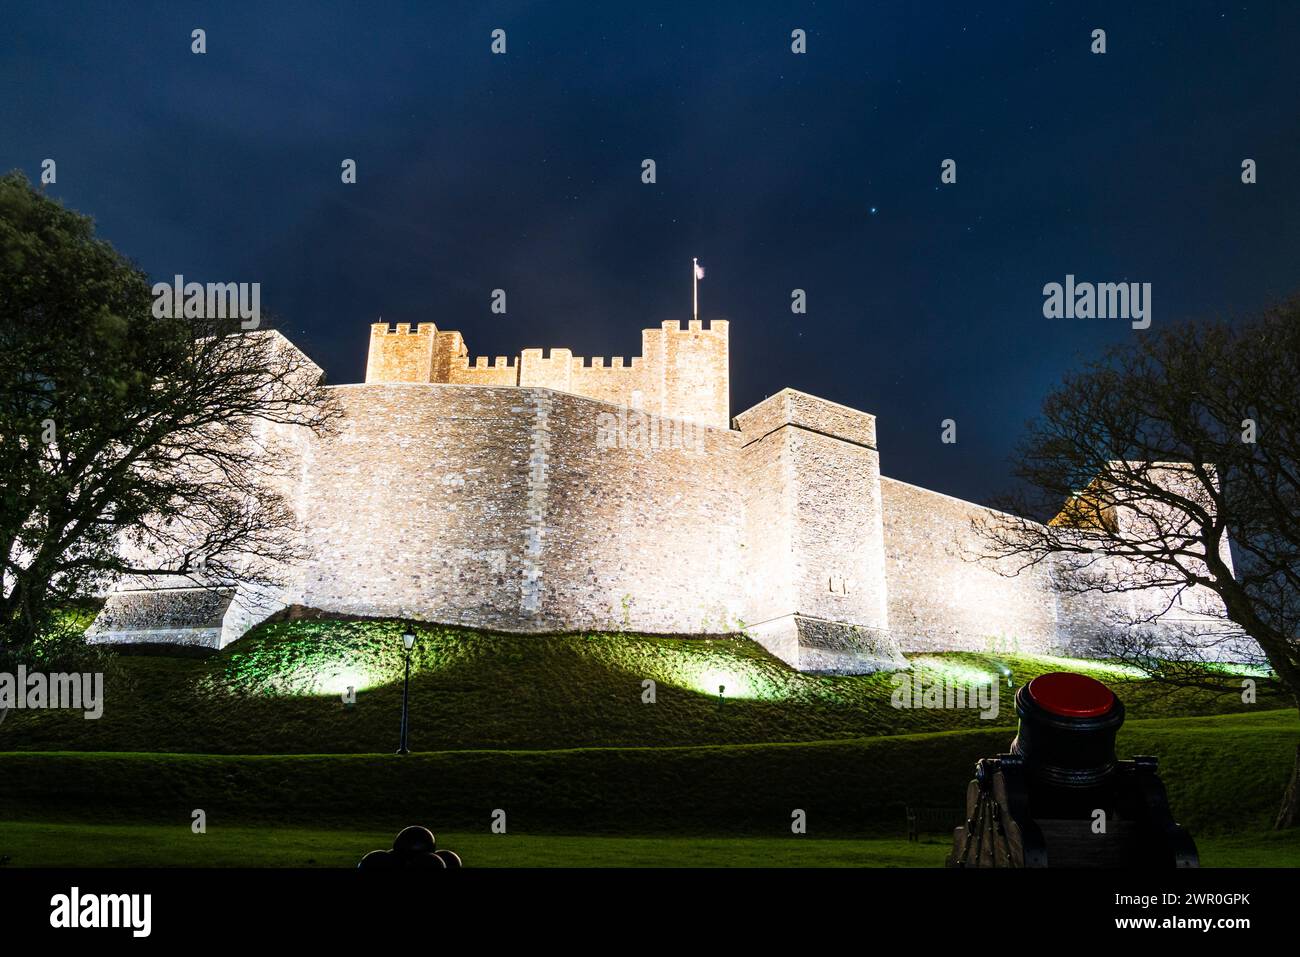 Dover castle at night. The embankment and curtain wall surrounding the main keep illuminated by spotlights. Medieval mortar in the foreground. Stock Photo